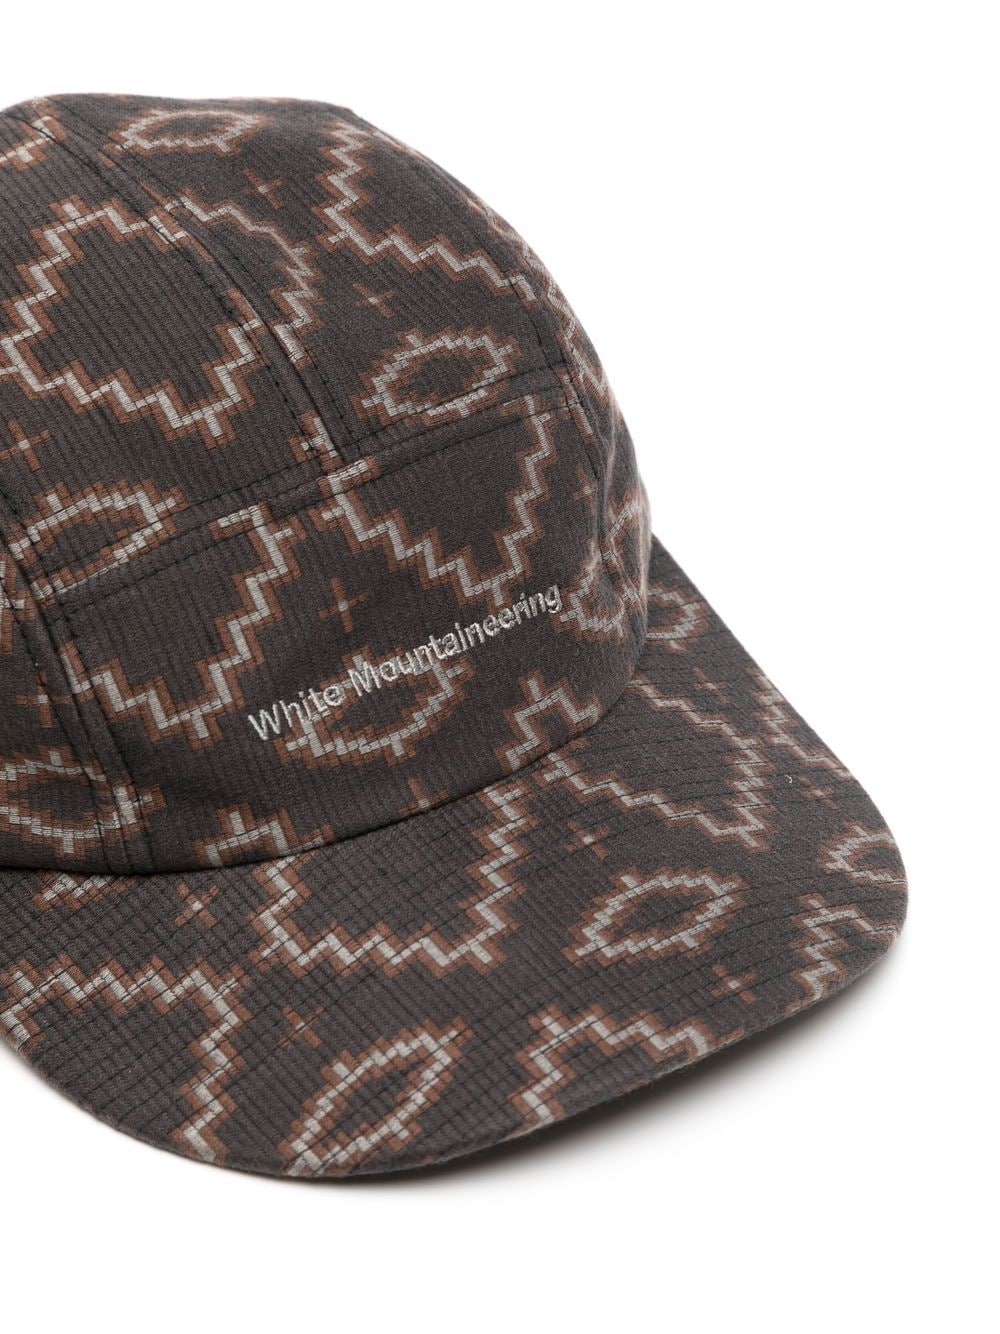 Shop White Mountaineering All-over Graphic-print Baseball Cap In Brown